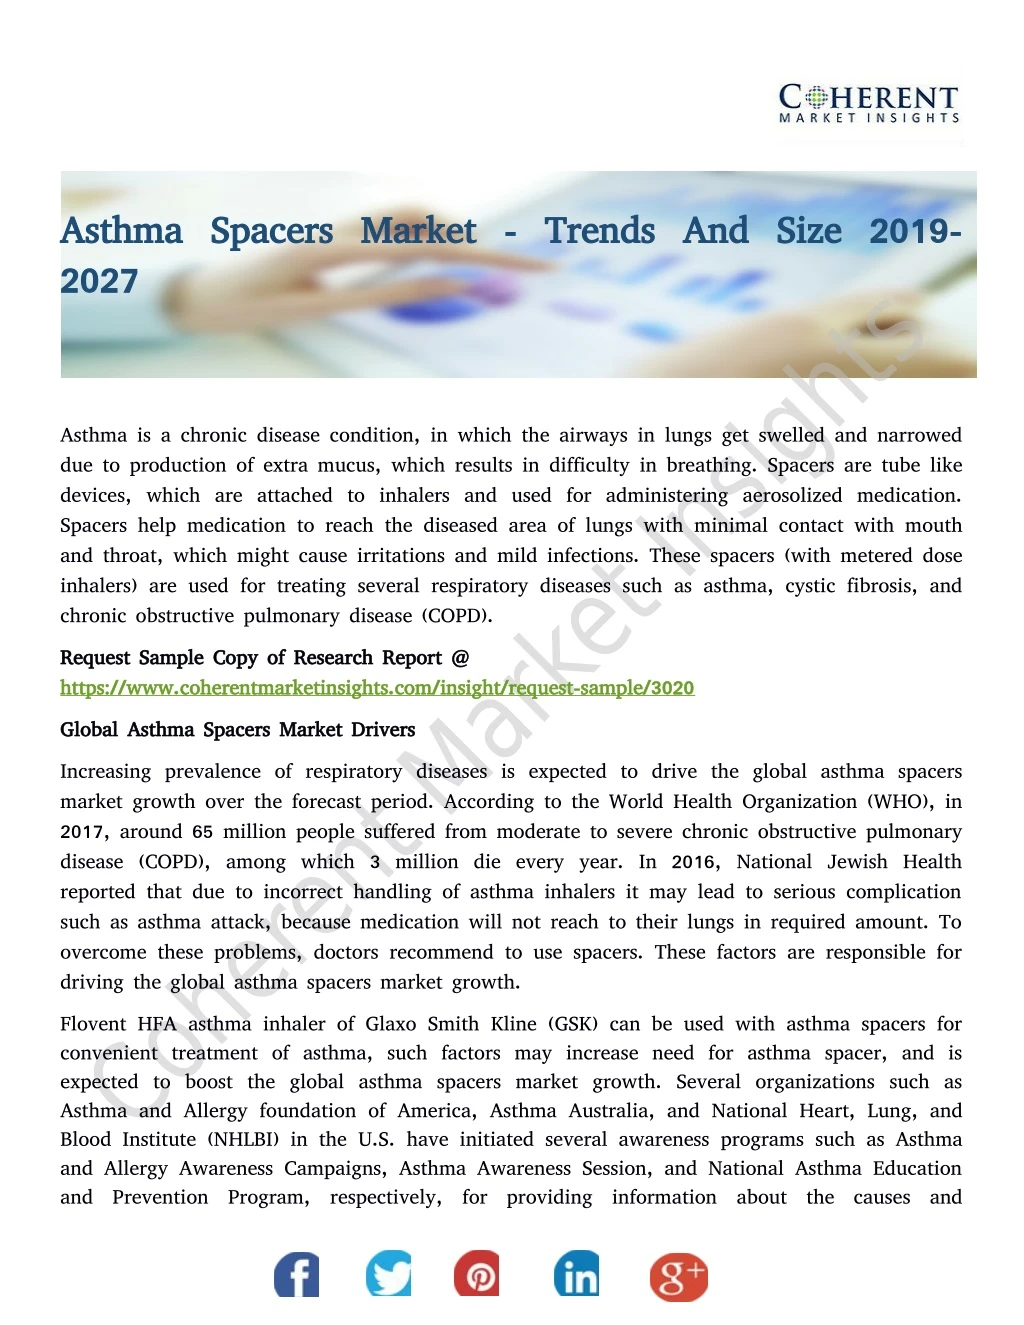 asthma spacers market trends and size 2019 asthma